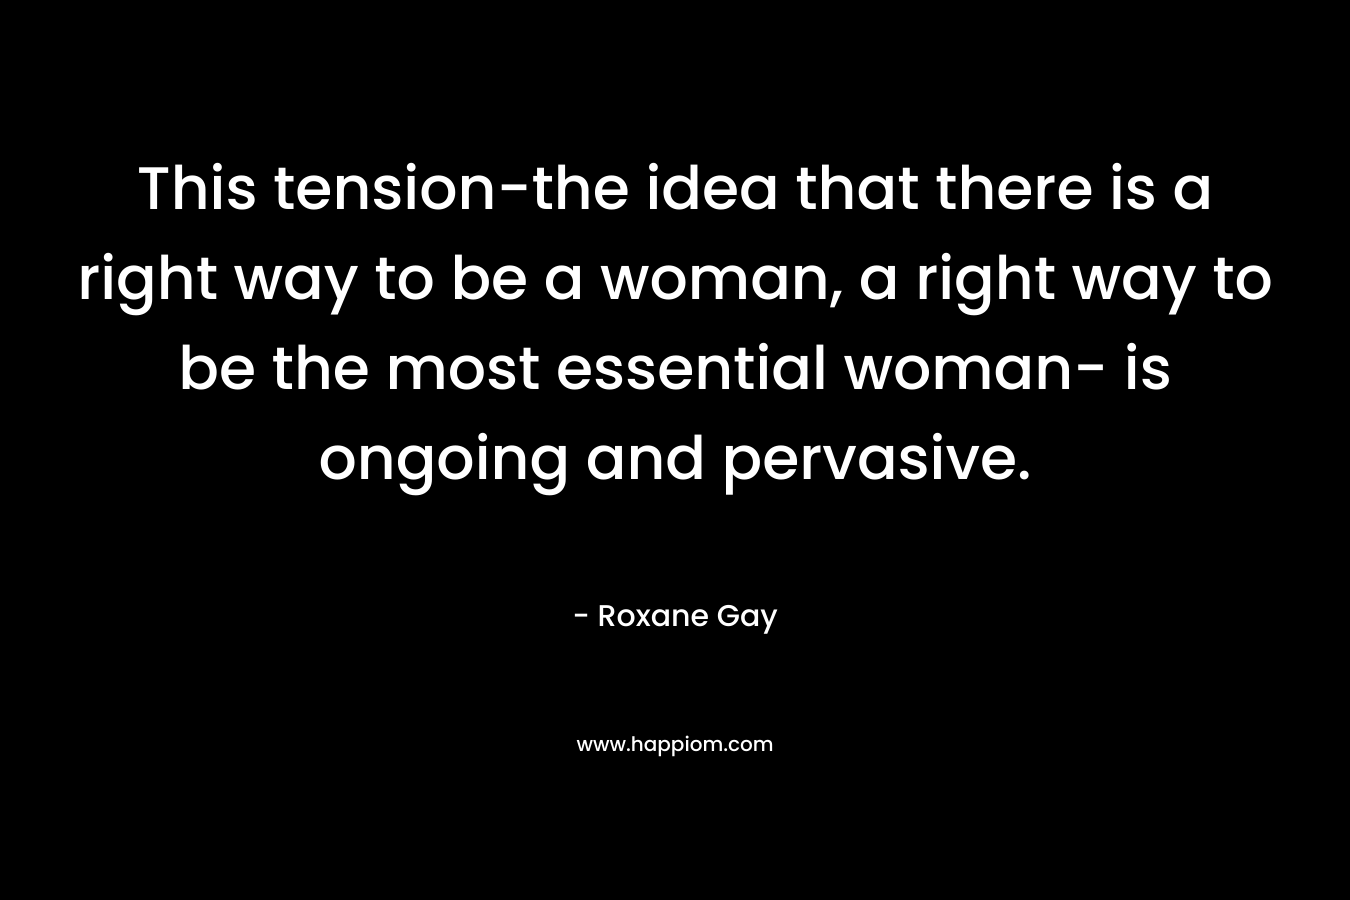 This tension-the idea that there is a right way to be a woman, a right way to be the most essential woman- is ongoing and pervasive.